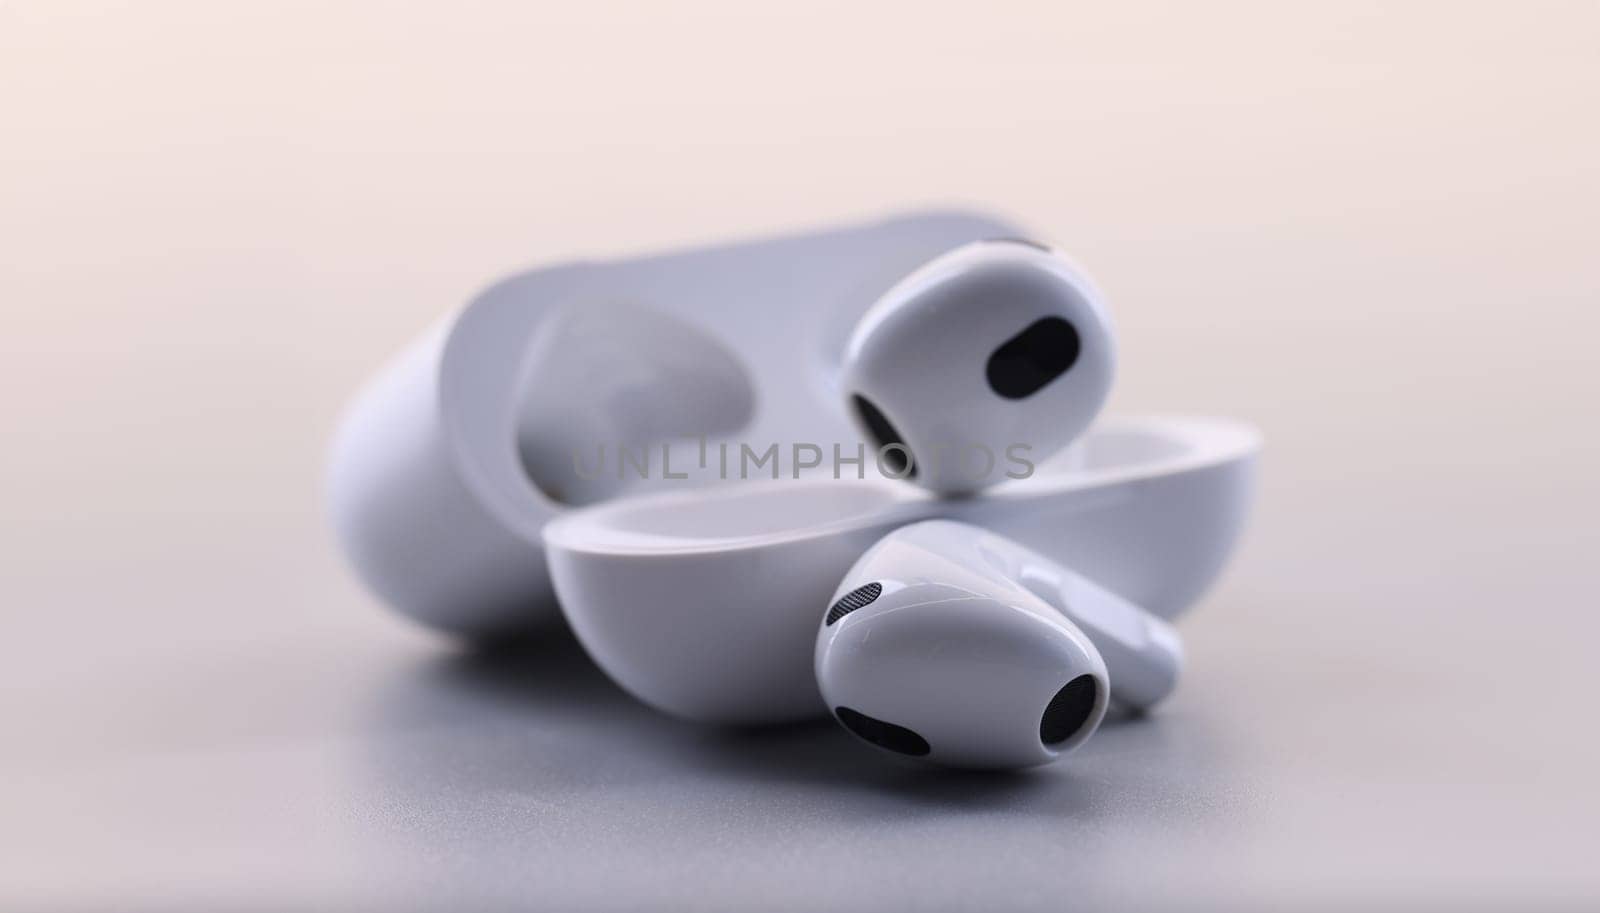 White electronic bluetooth headphones and technical cases on white background. Fashion stylish headphones concept